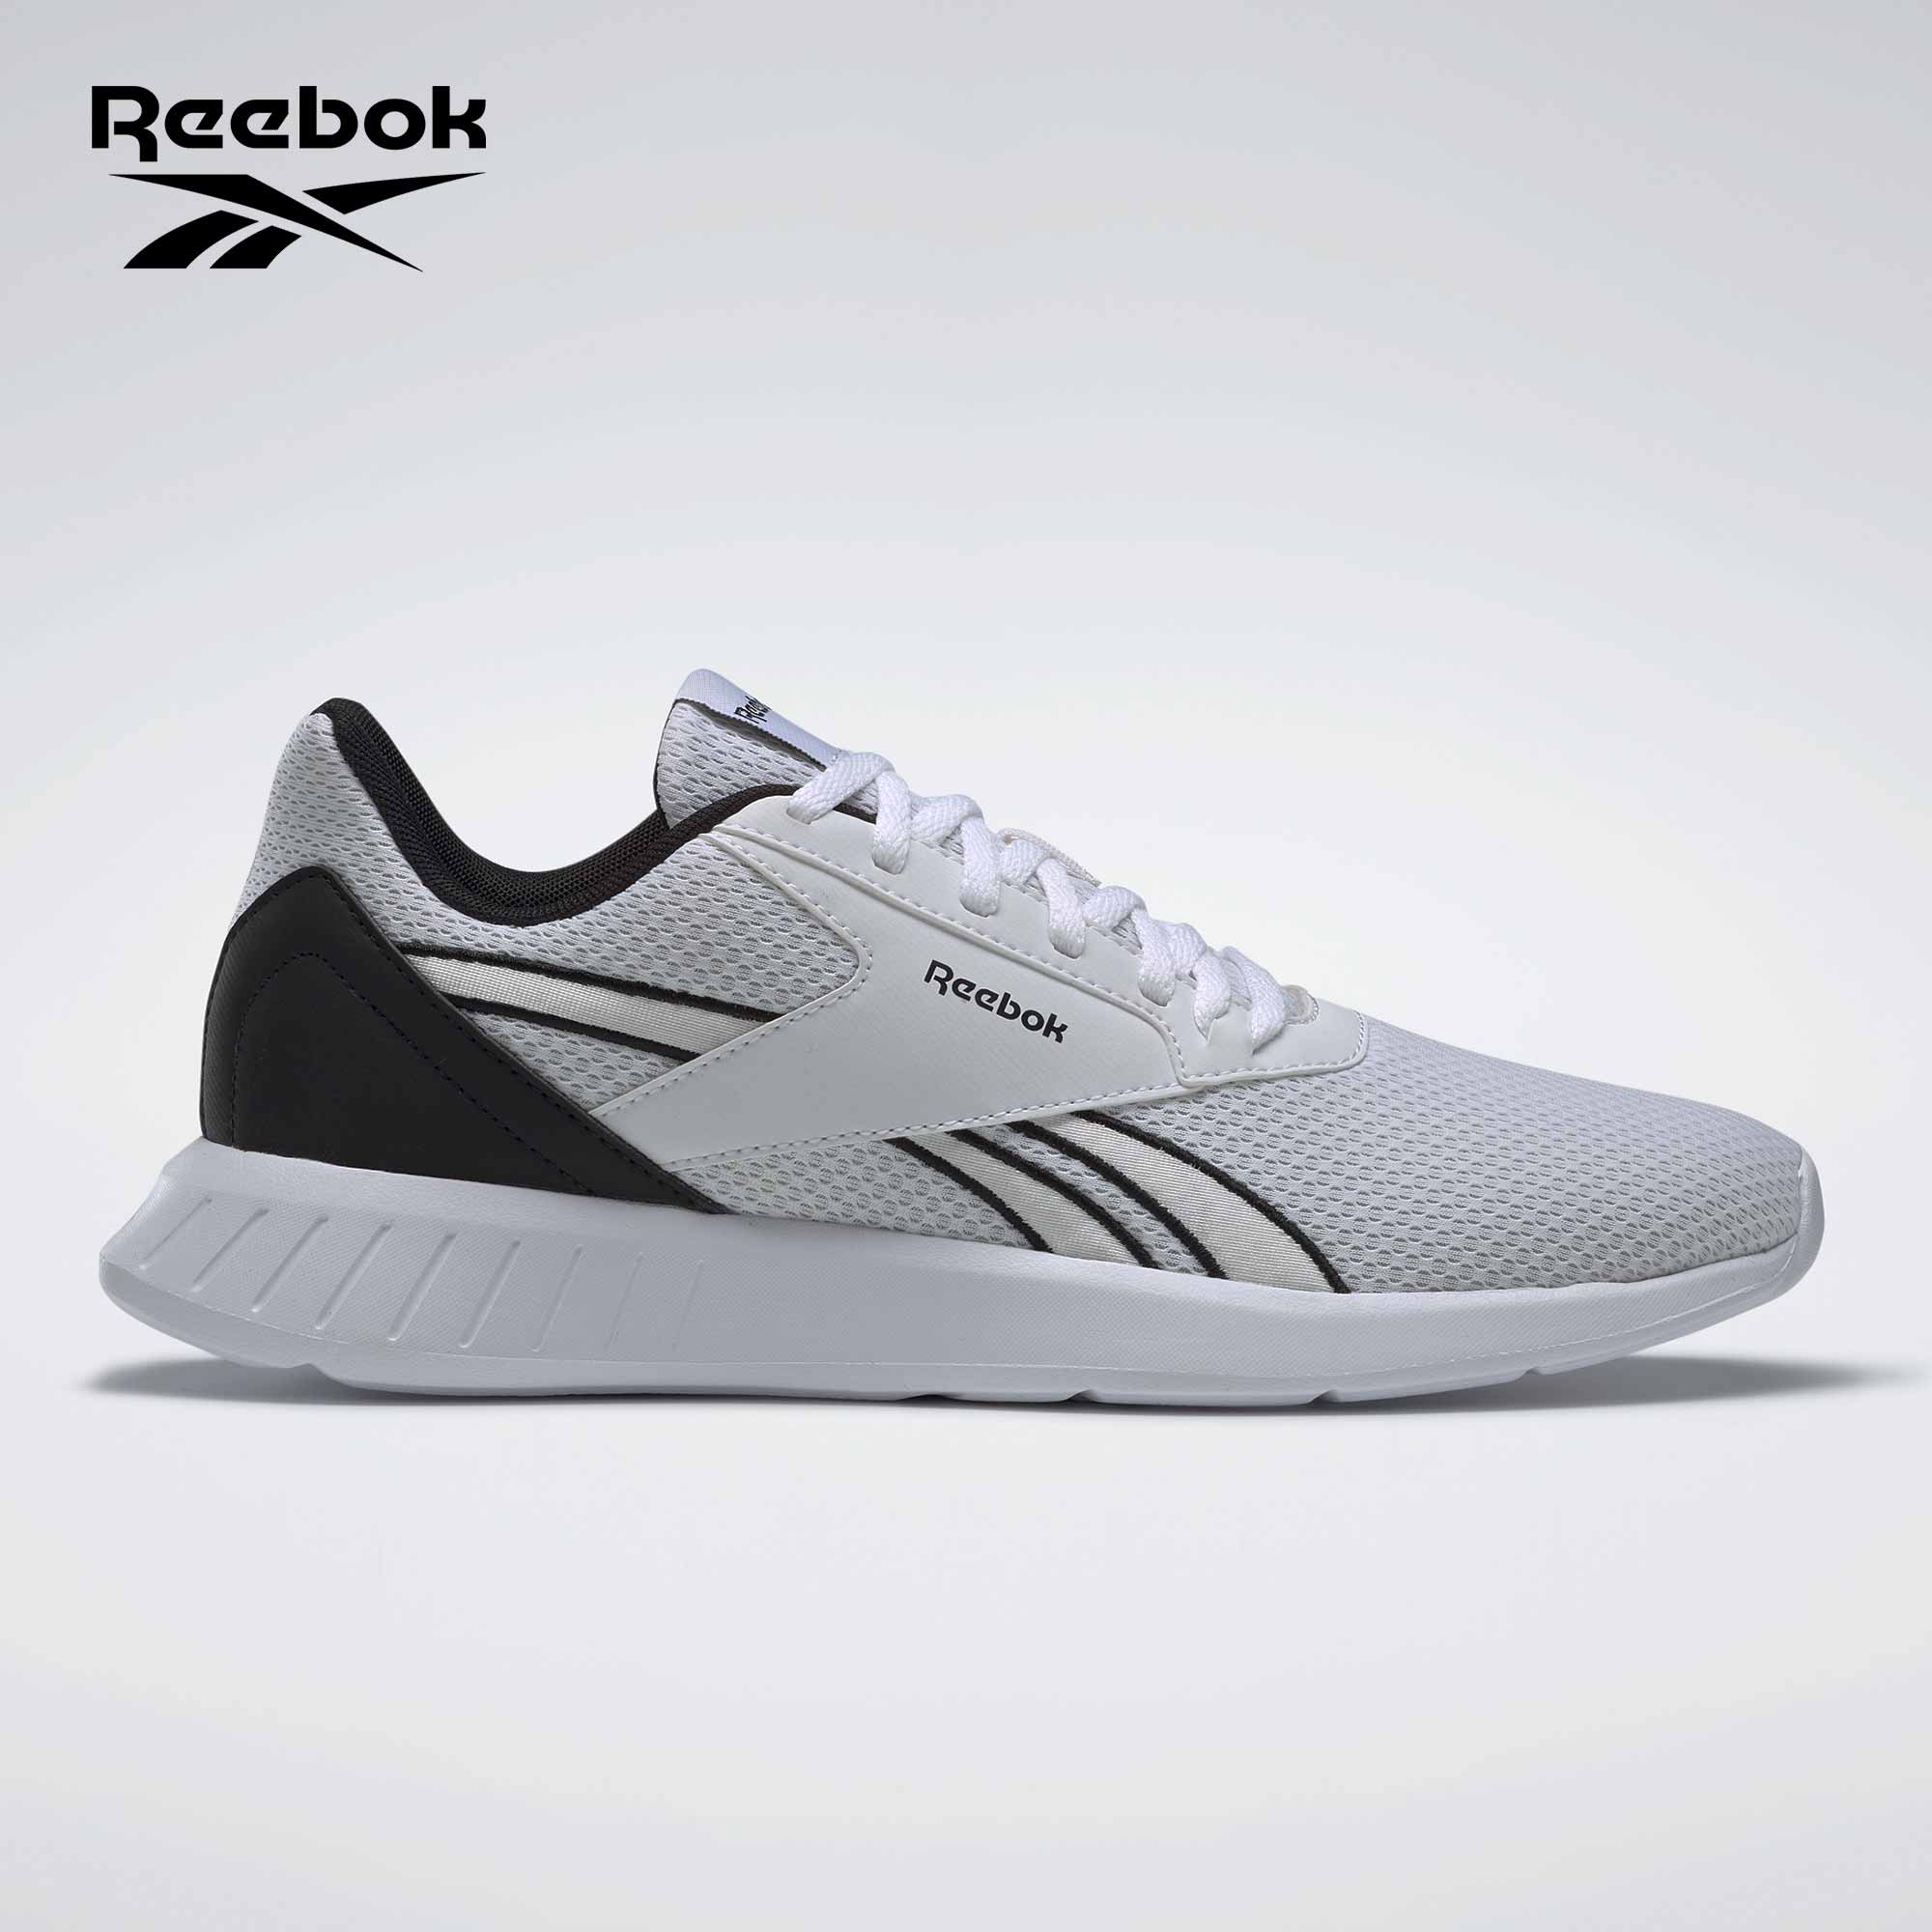 price of reebok shoes in the philippines